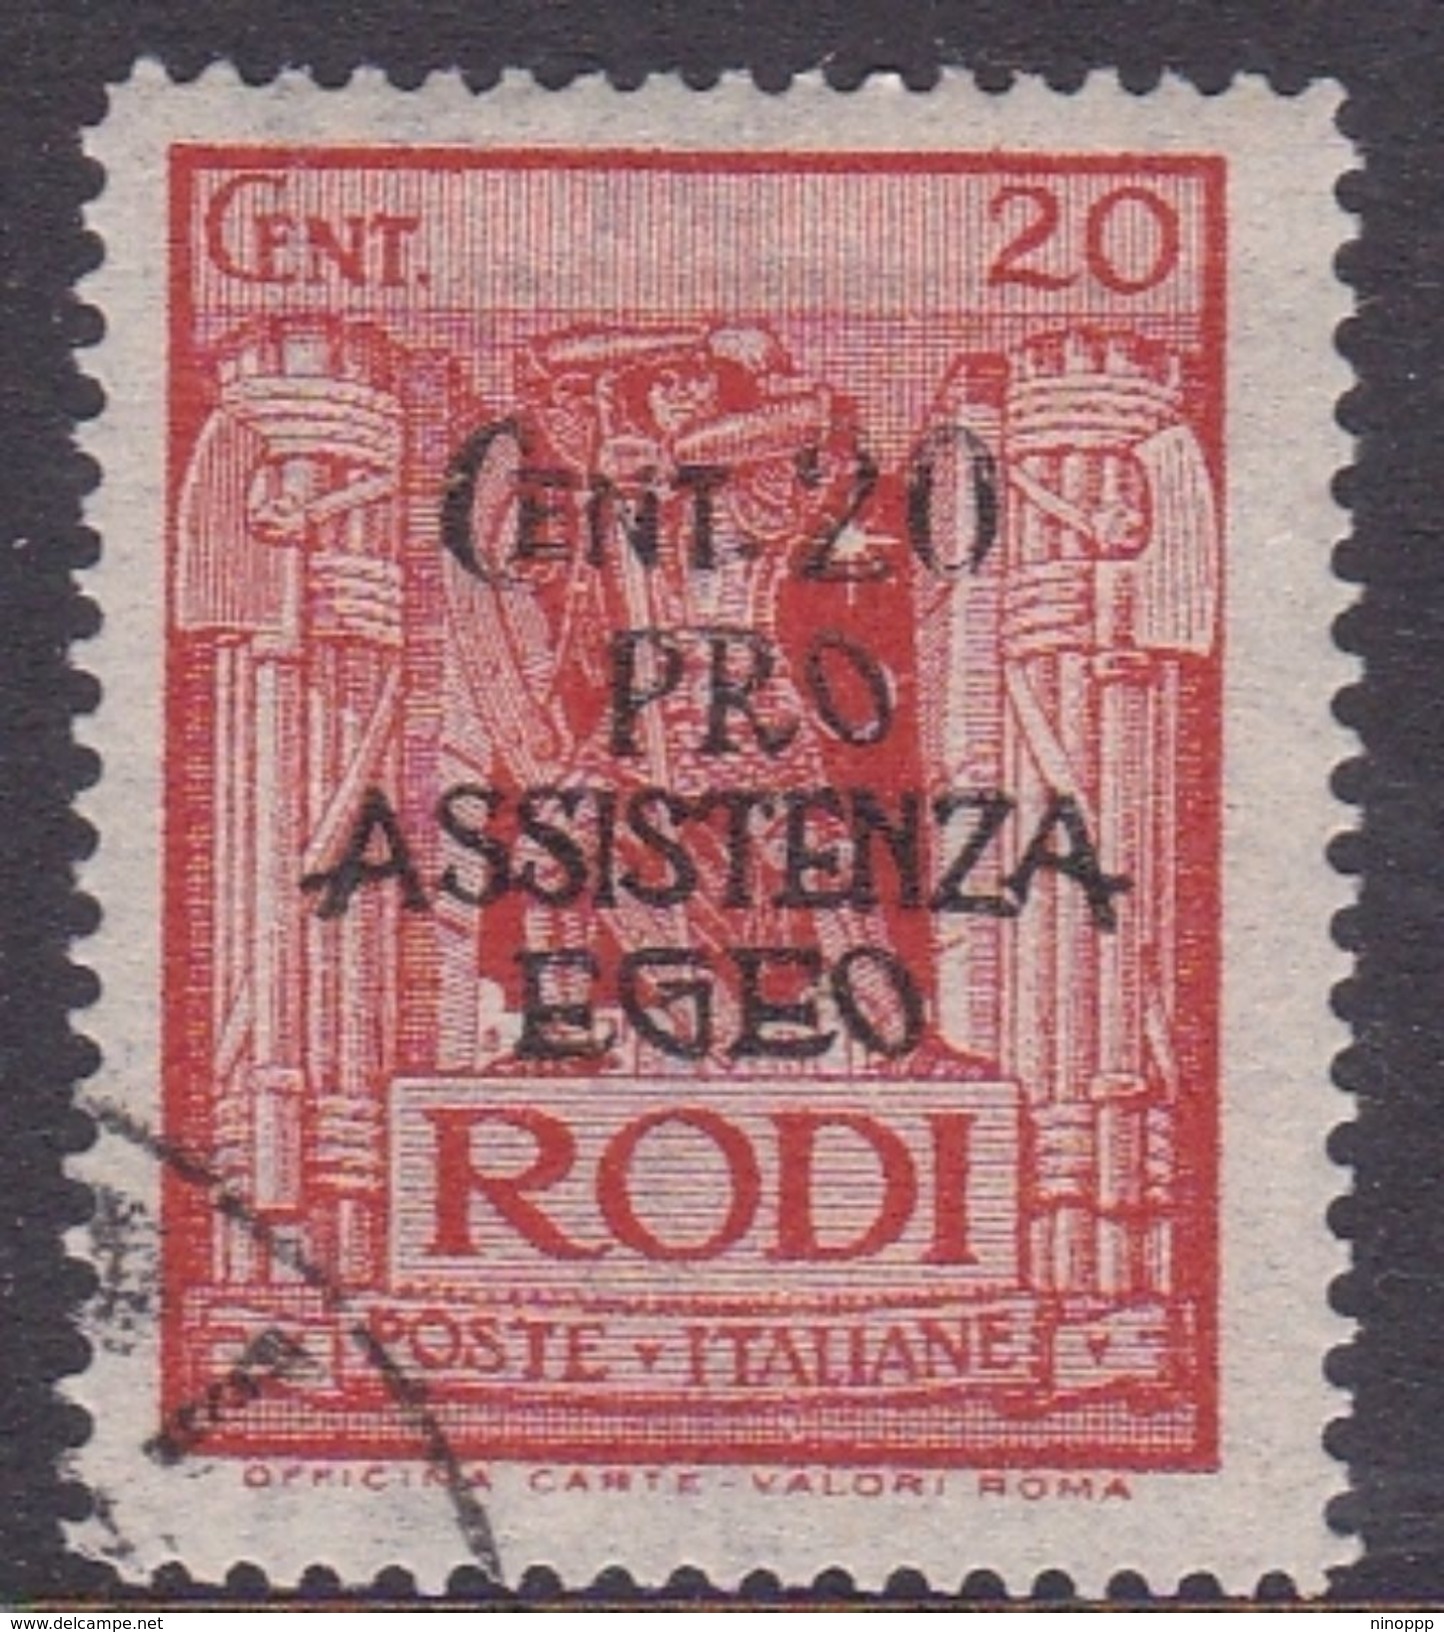 Italy-Colonies And Territories-Aegean General Issue-Rodi S120 1943 Pro Assistenza Egeo,20c+20c Red Used - General Issues